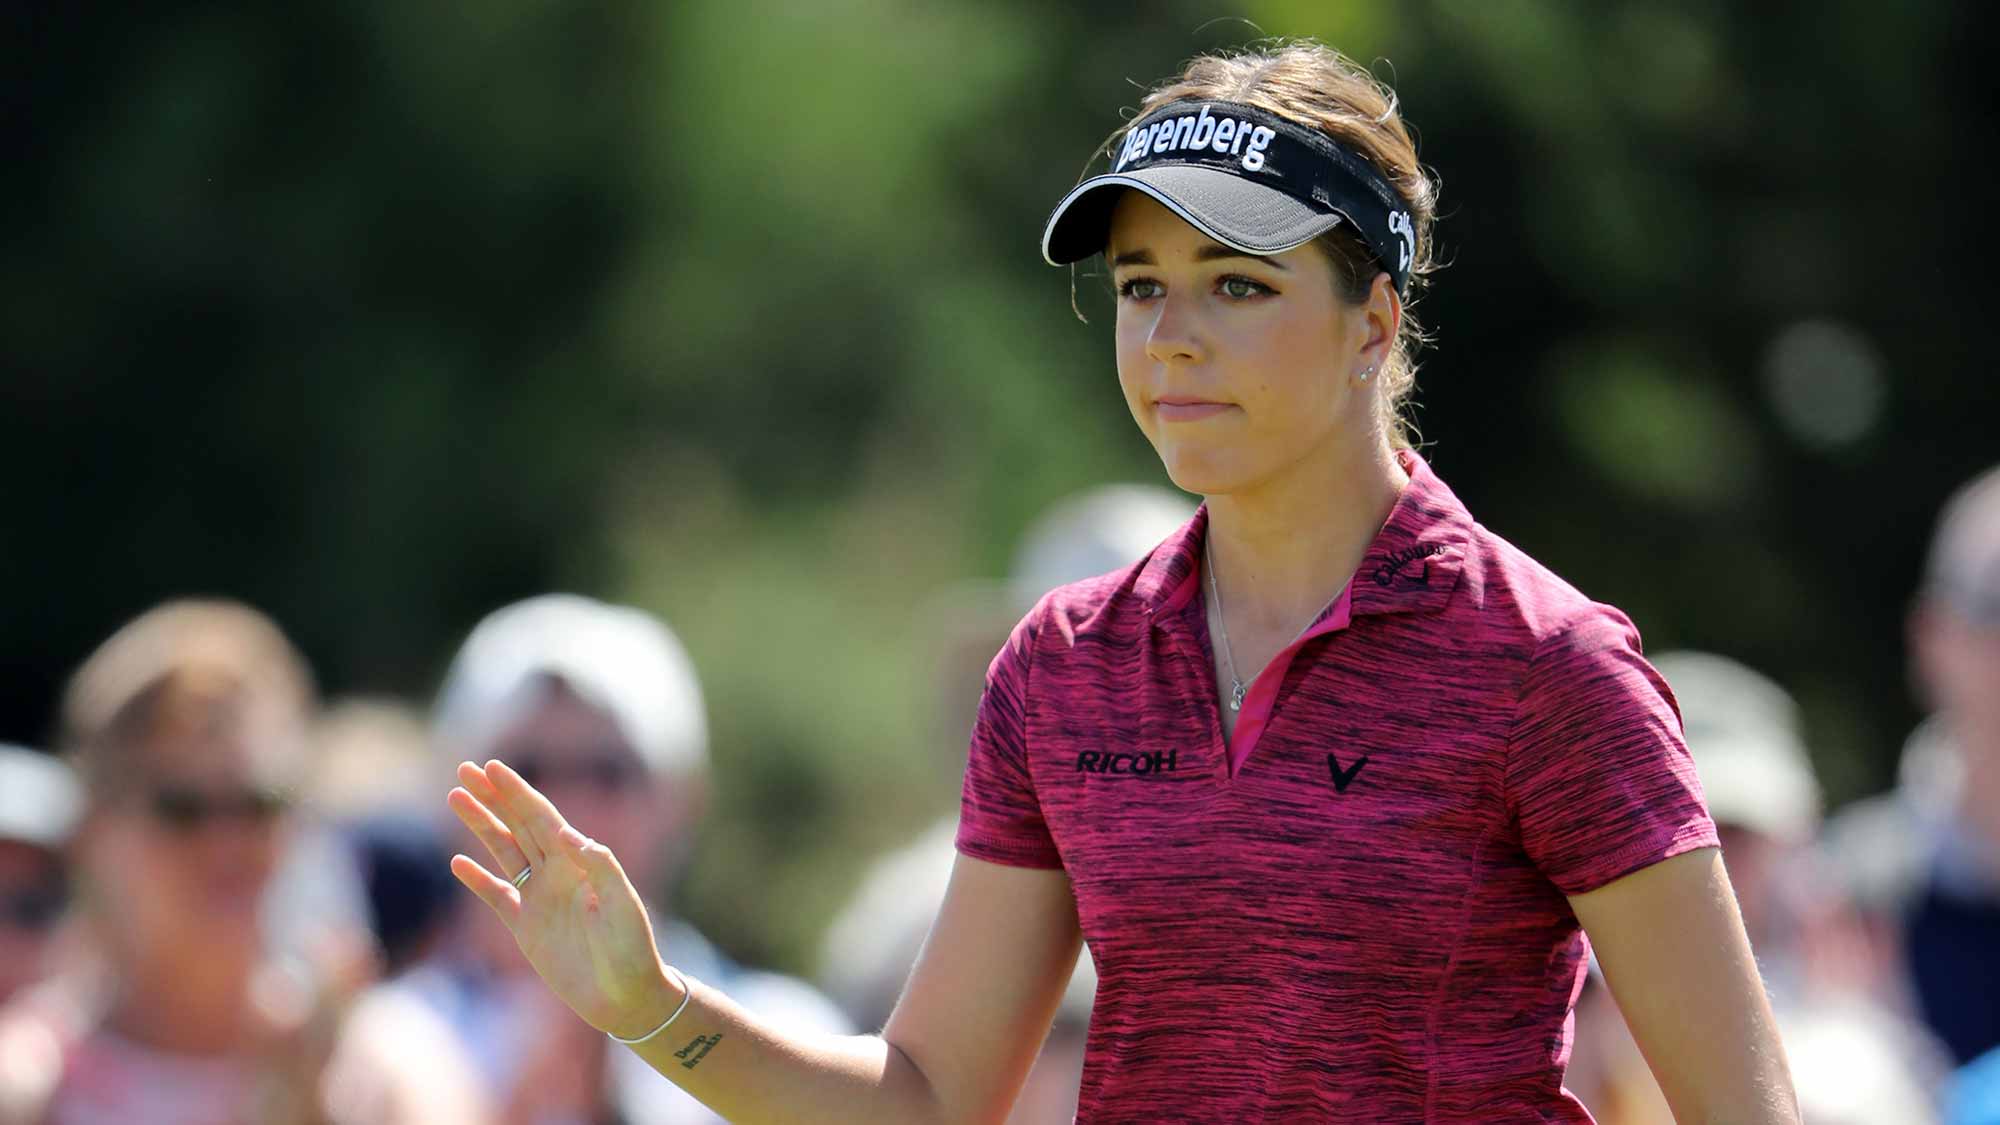 Five Things to Know From the Final Round of Ricoh Women's British Open